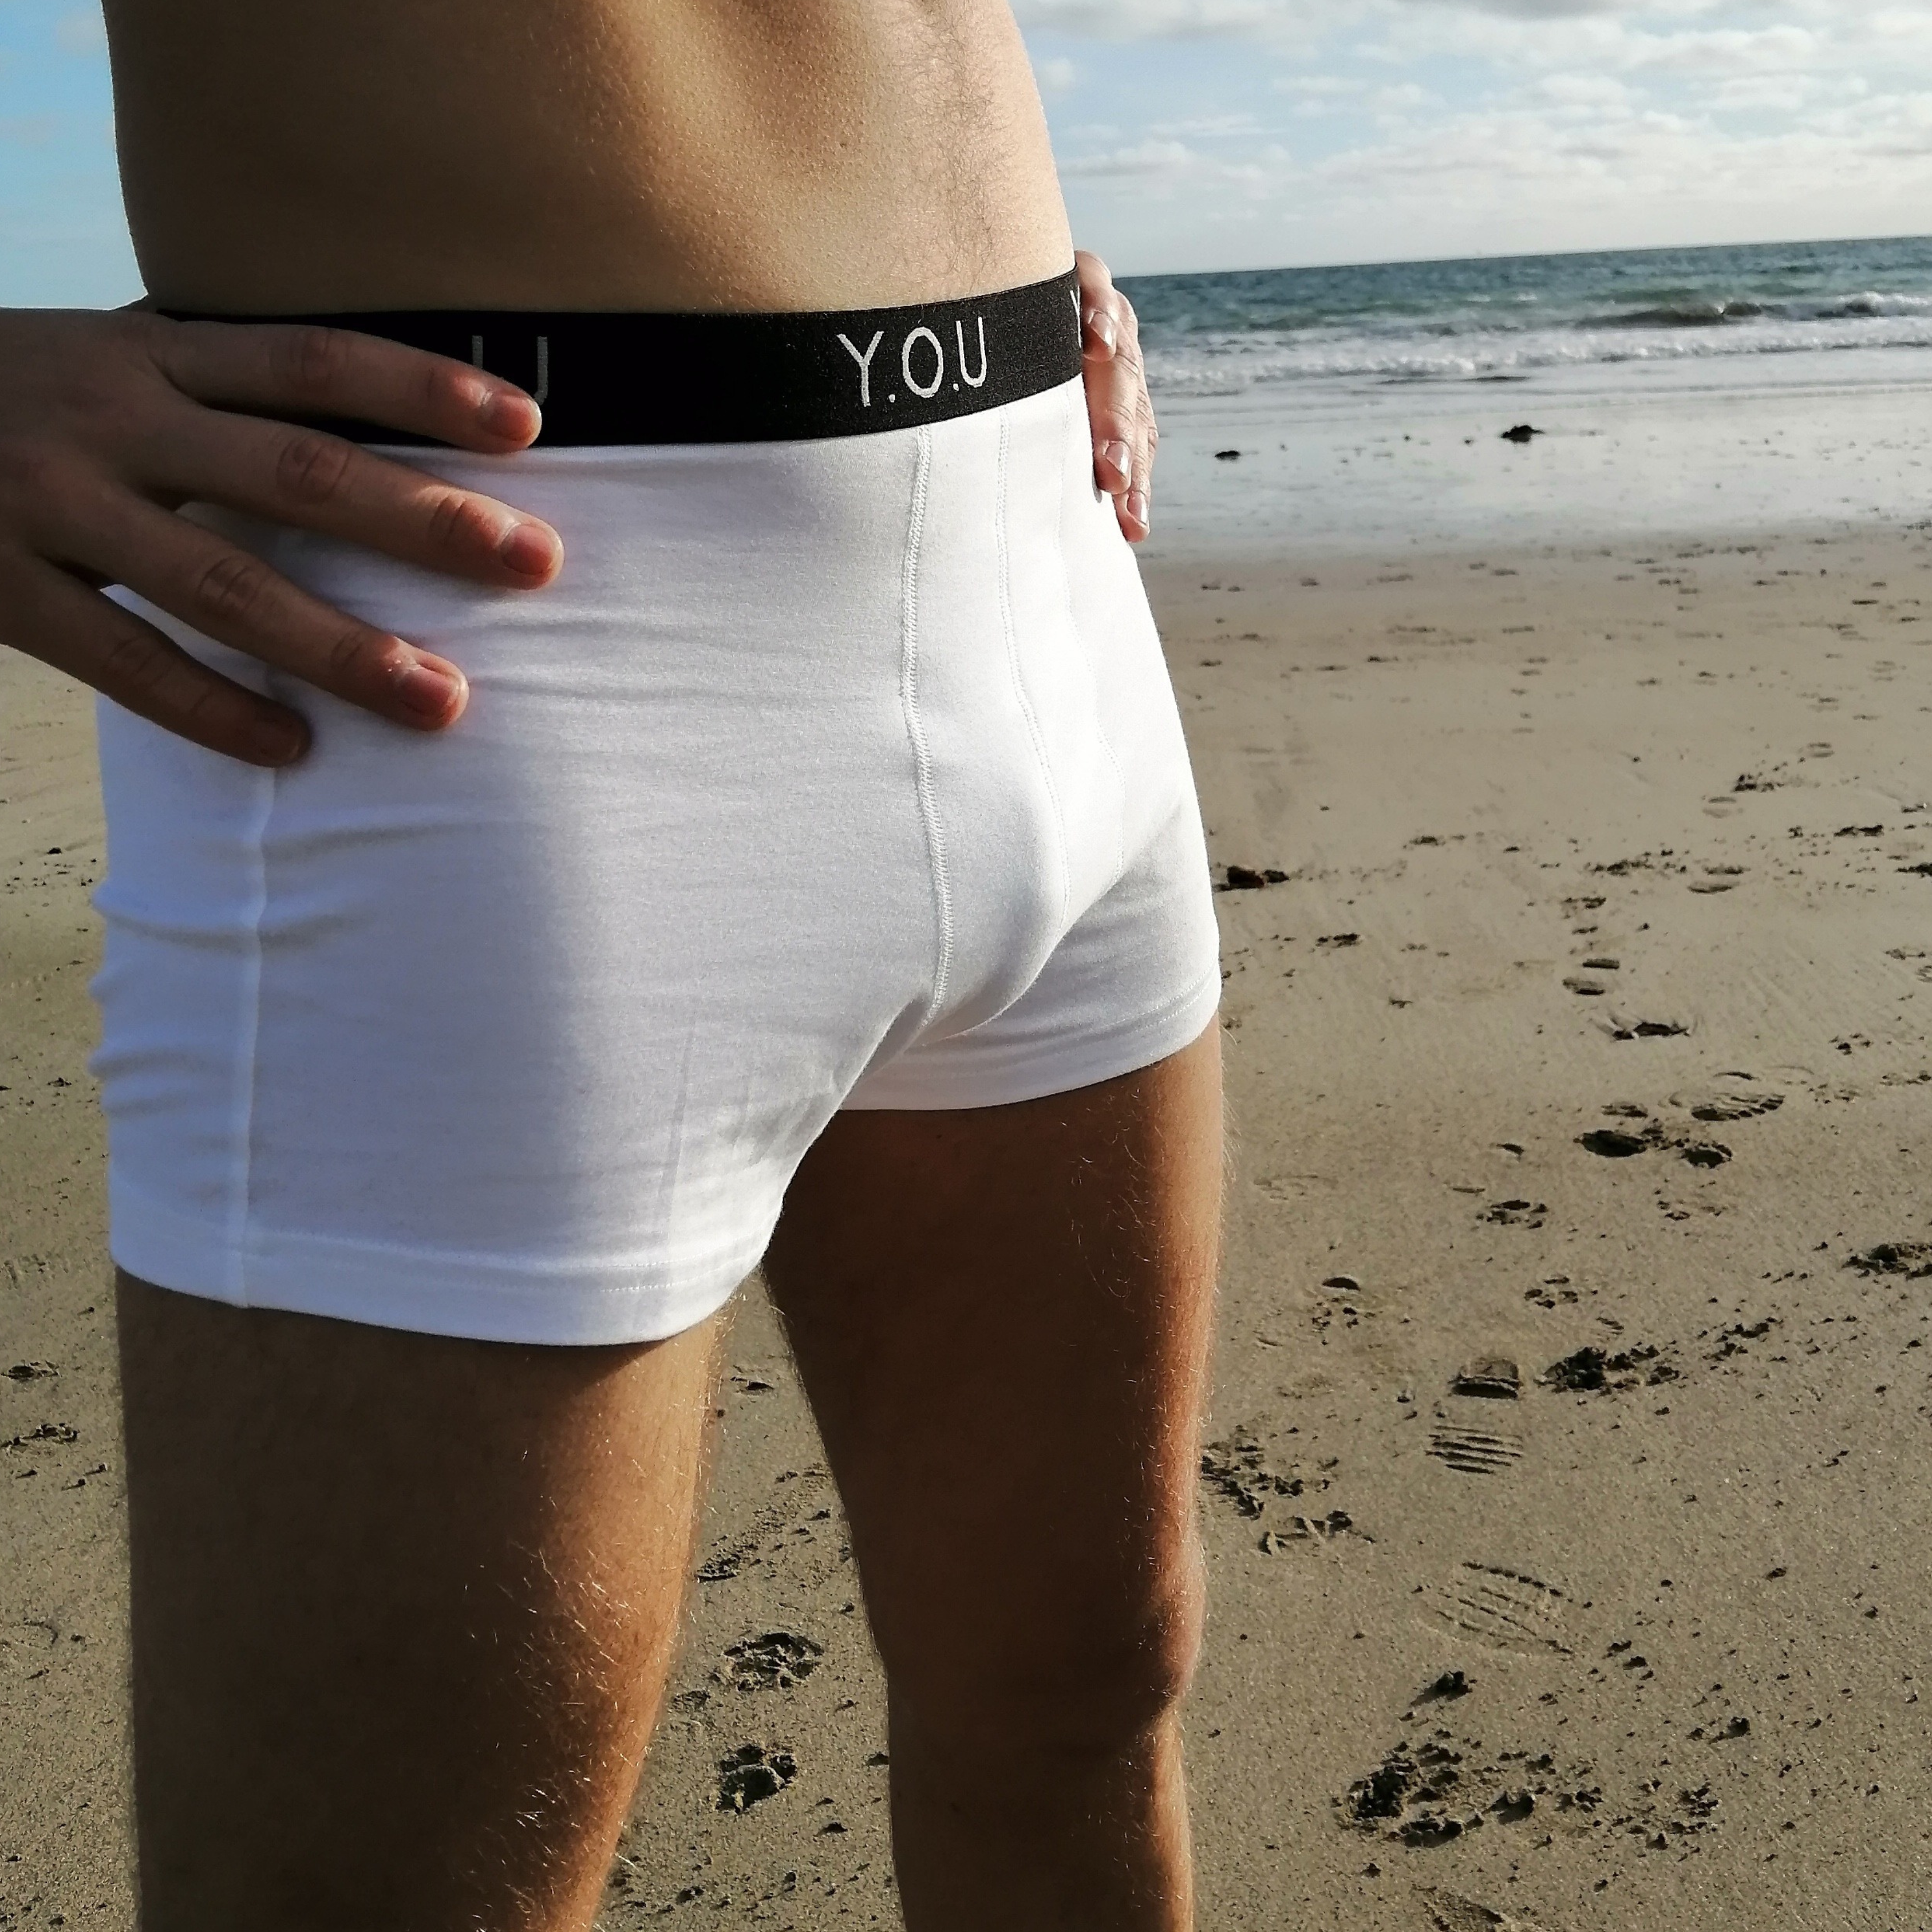 A person standing on a sandy beach near the ocean, wearing a pair of white men’s hipster trunks with a black waistband that has the letters "Y.O.U" on it. The person’s torso and legs are visible, with their hands resting on their hips. The sky is partly cloudy.